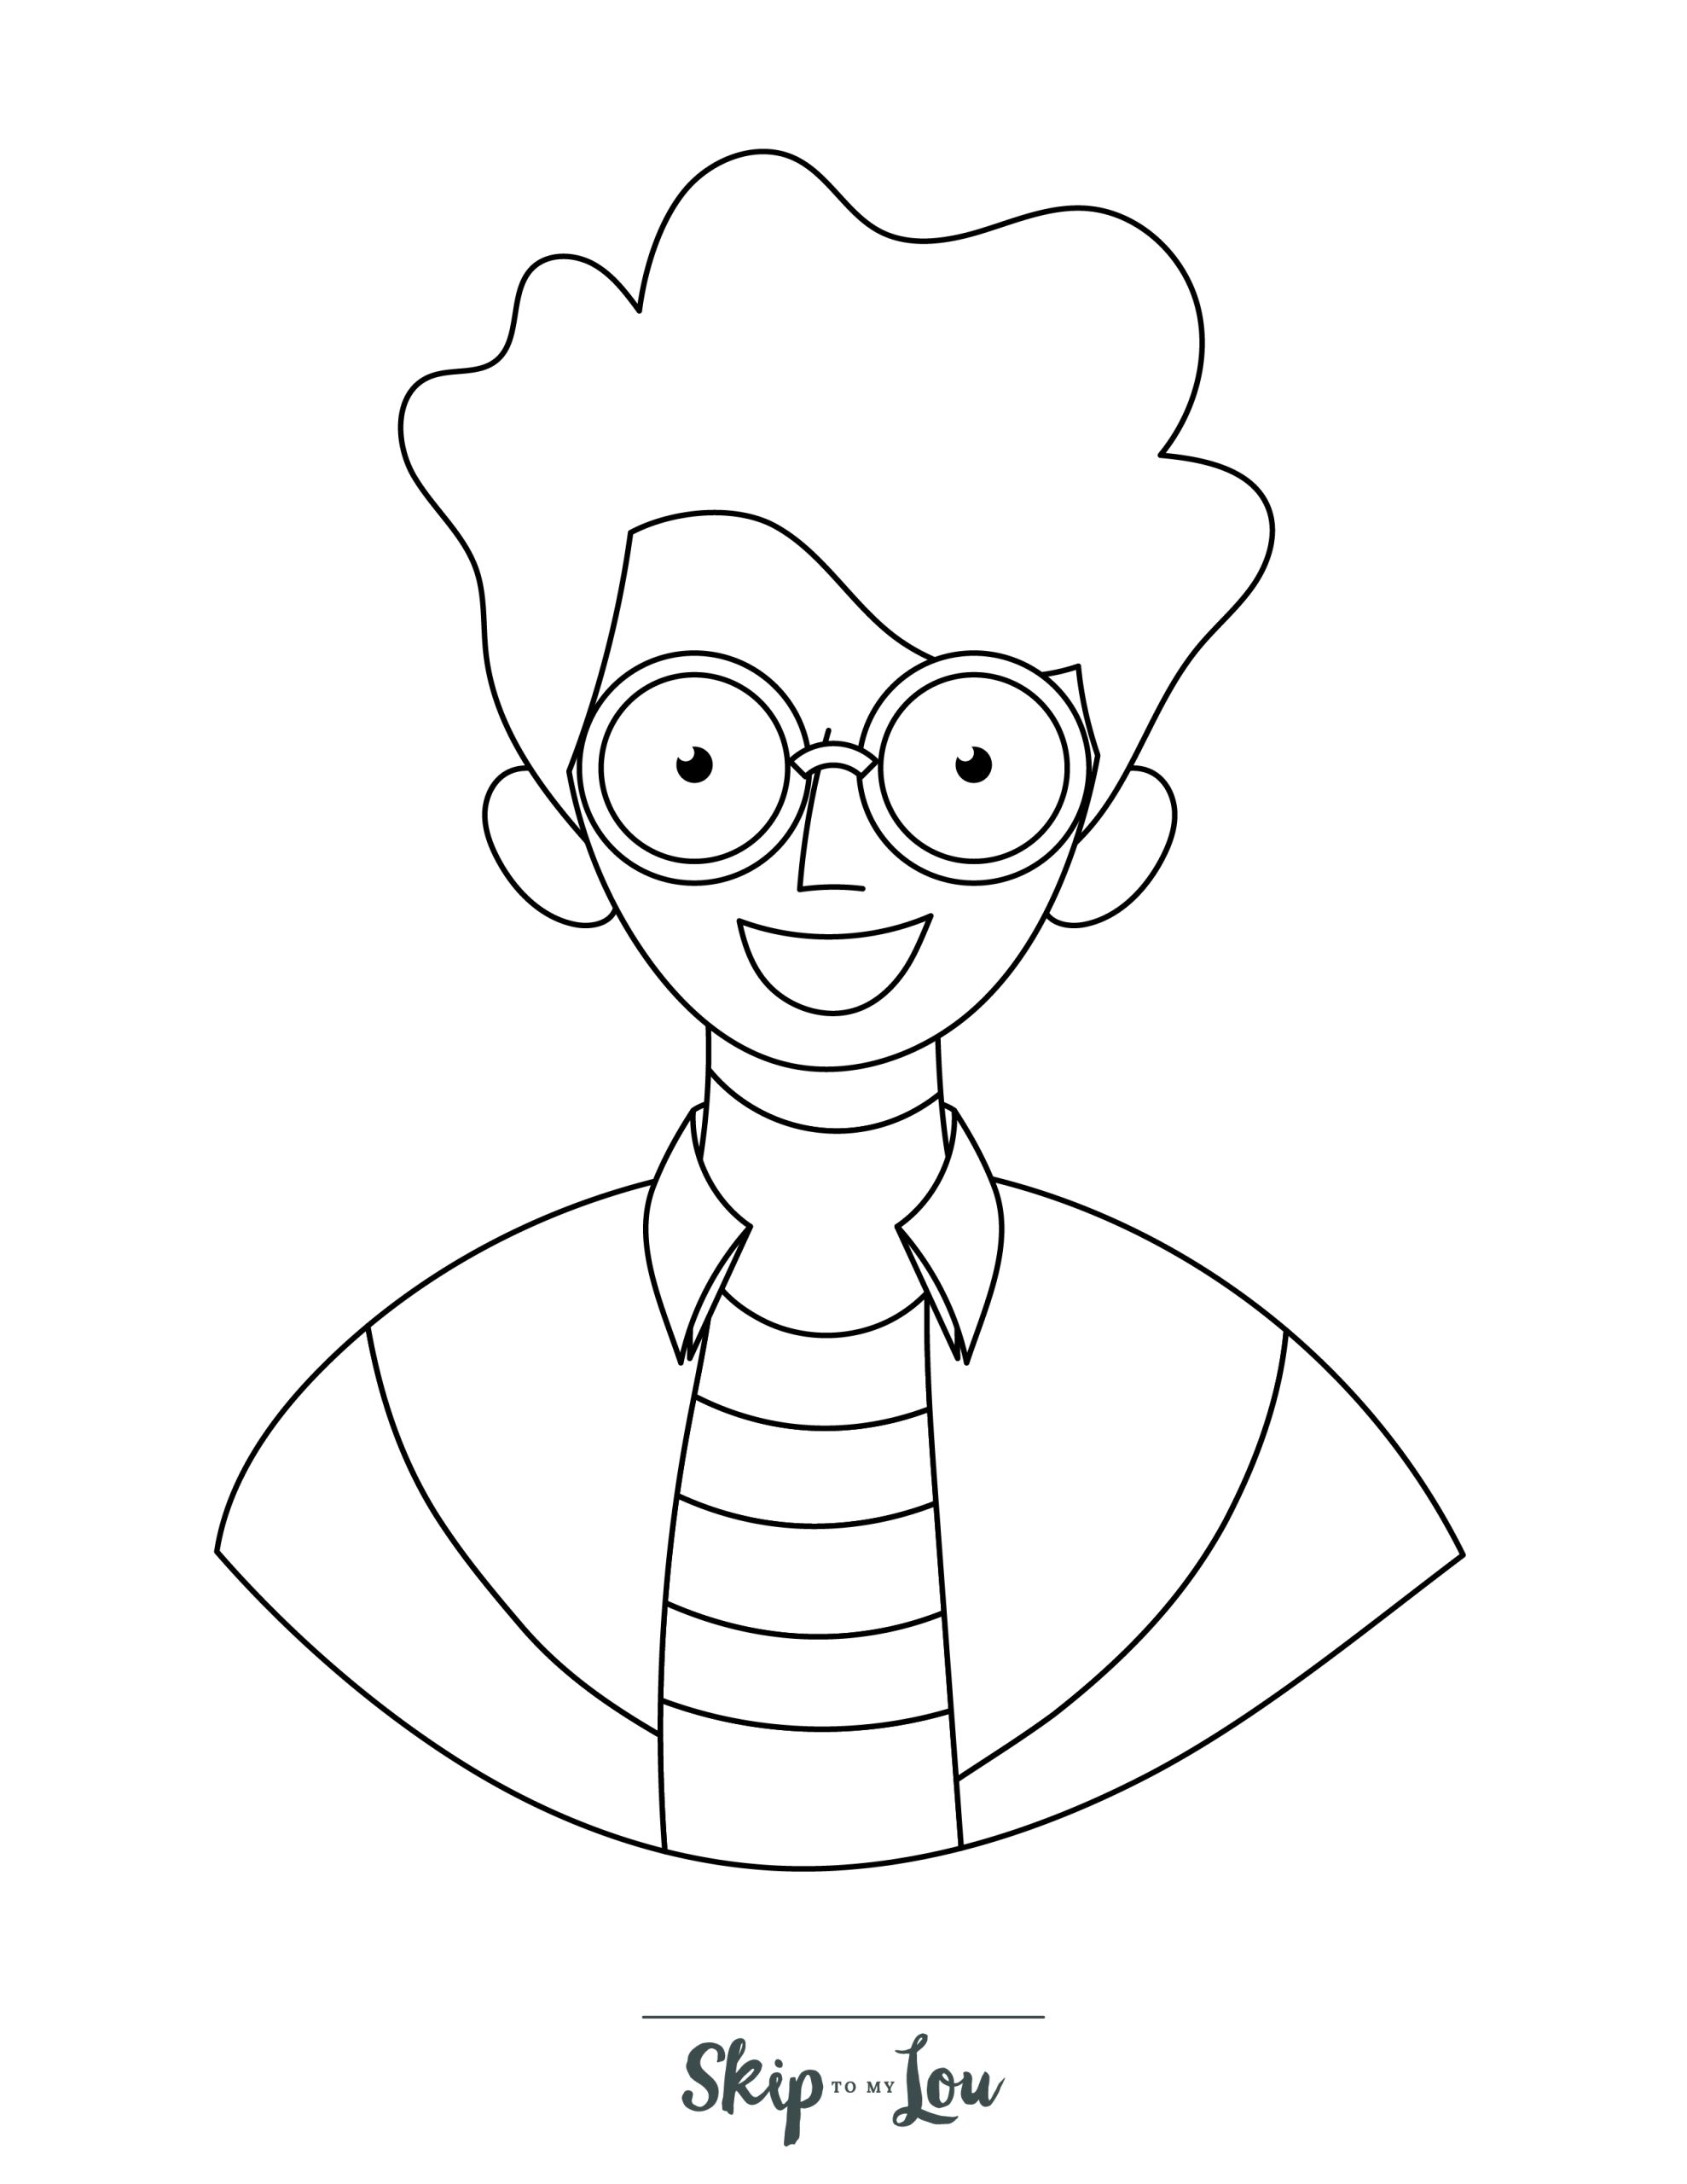 People Coloring Page 8 - Line drawing of boy with glasses